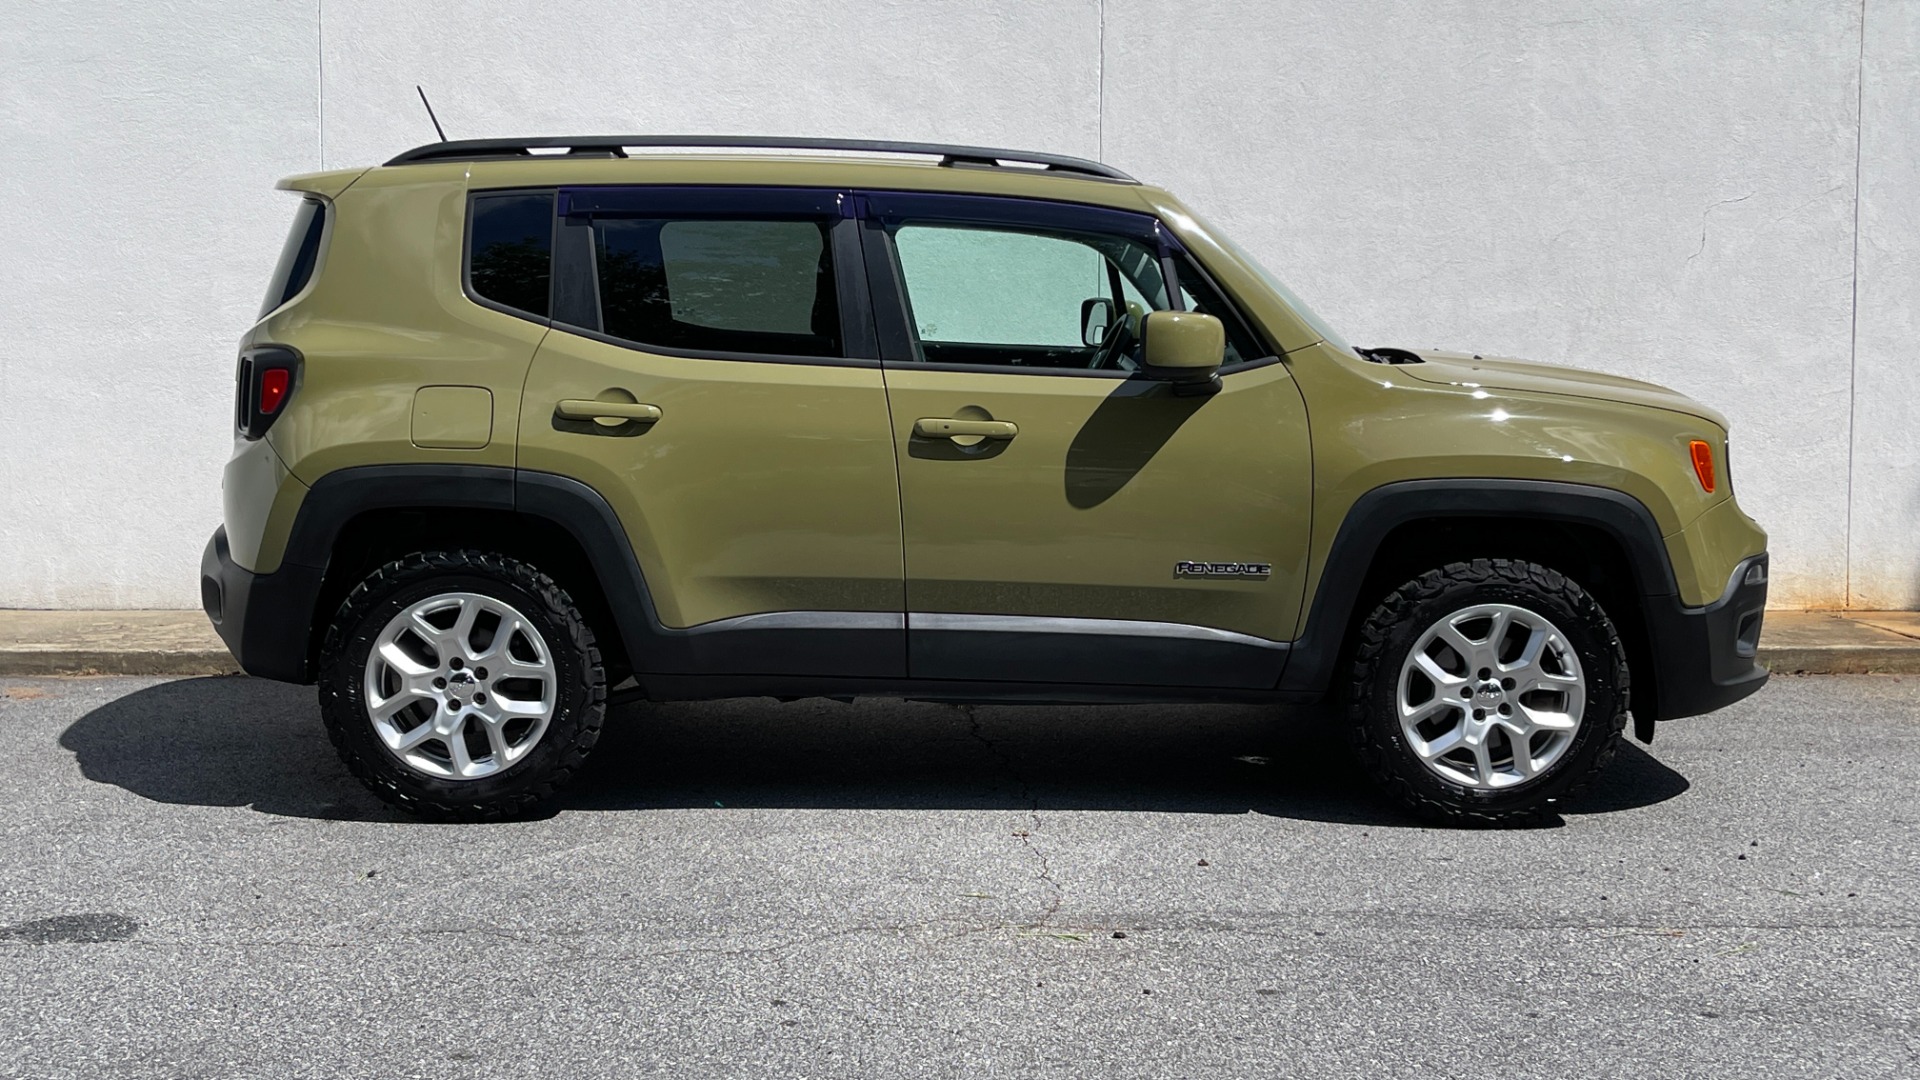 Used 2015 Jeep Renegade LATITUDE / 2.4L ENGINE / KEYLESS ENTRY / REMOTE START for sale $18,495 at Formula Imports in Charlotte NC 28227 4